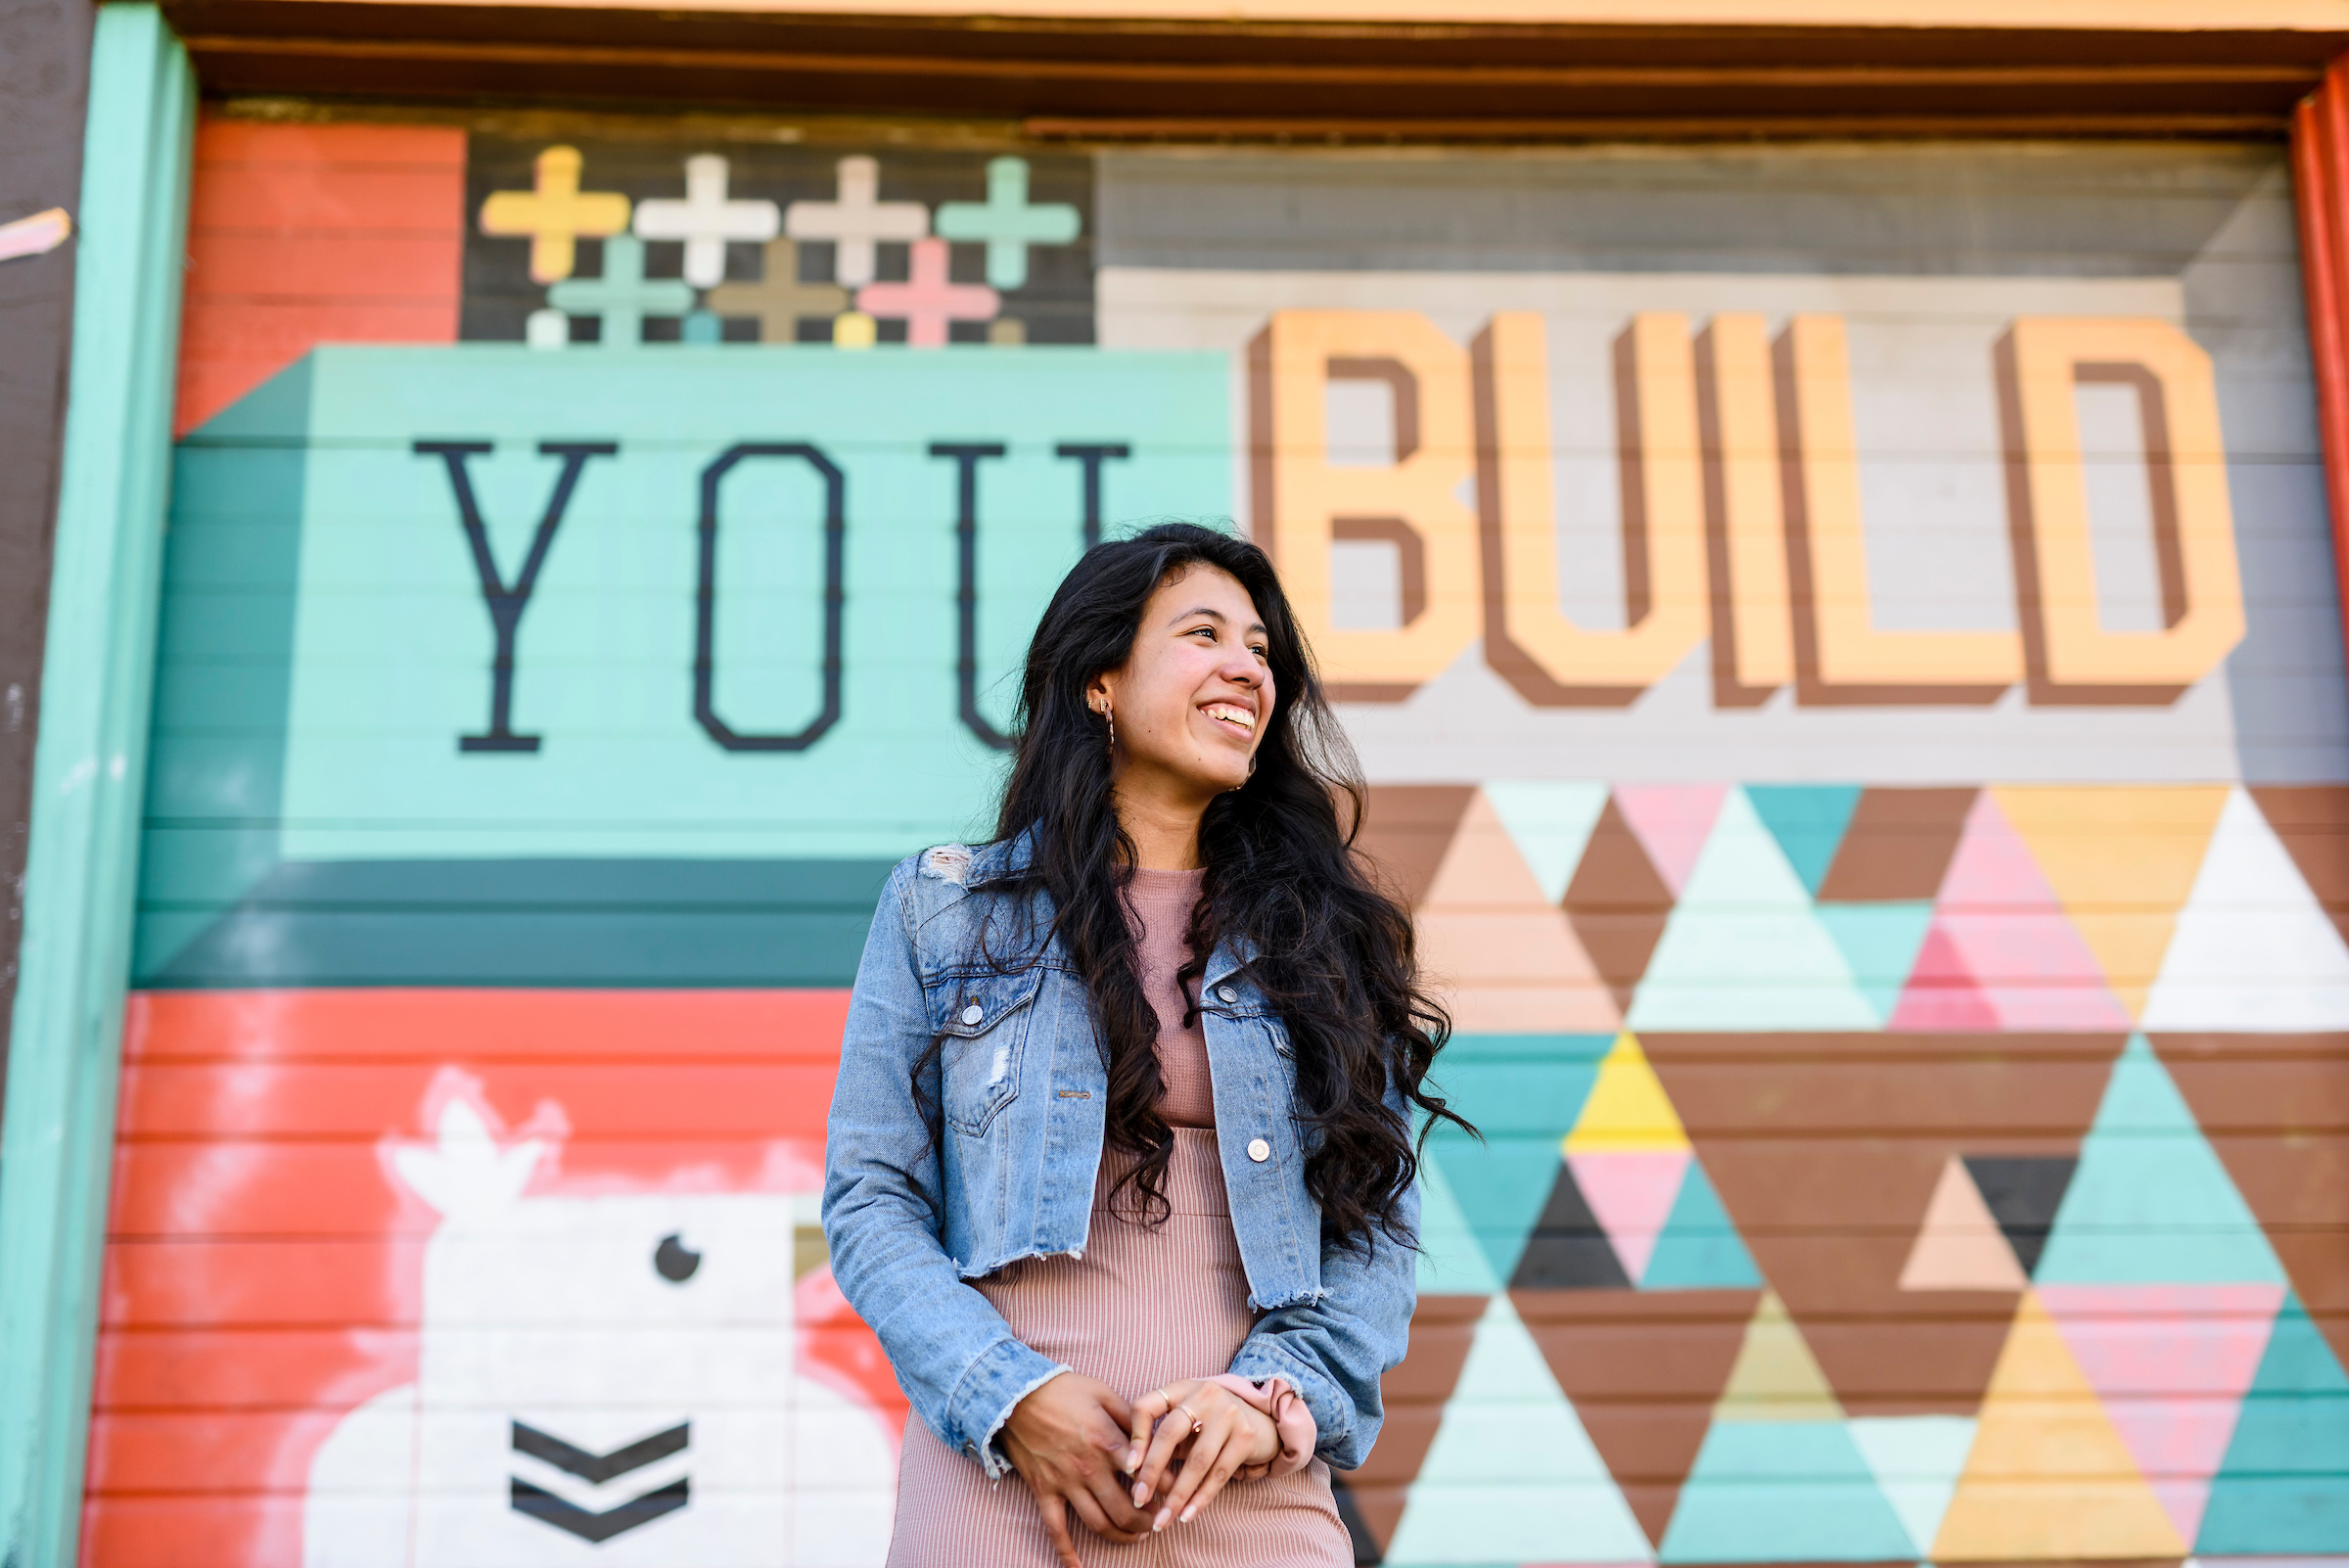 Student standing in front a mural that says "You Build"